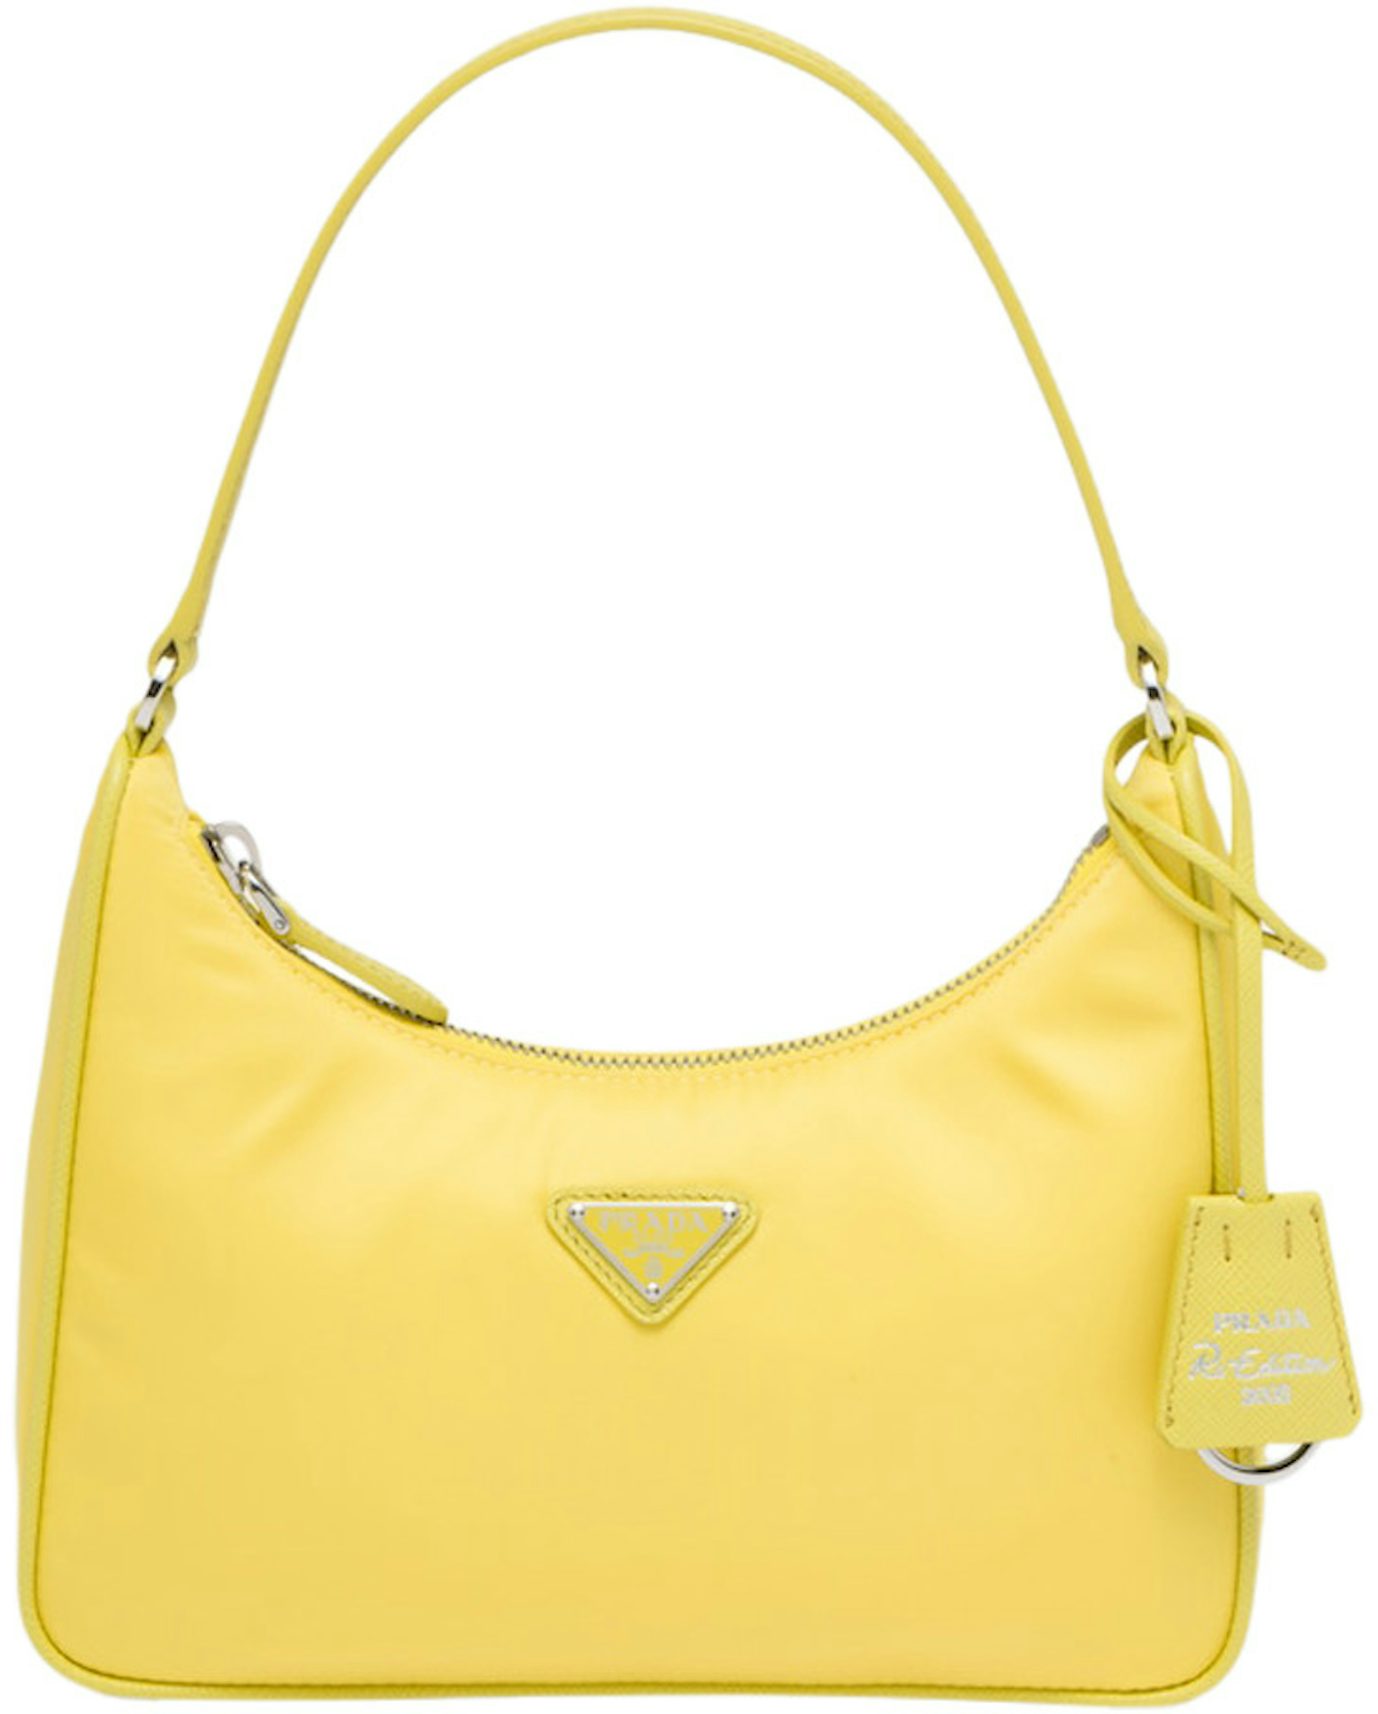 Prada 2005 Shoulder Bag Yellow in Re-Nylon with Silver-tone - US